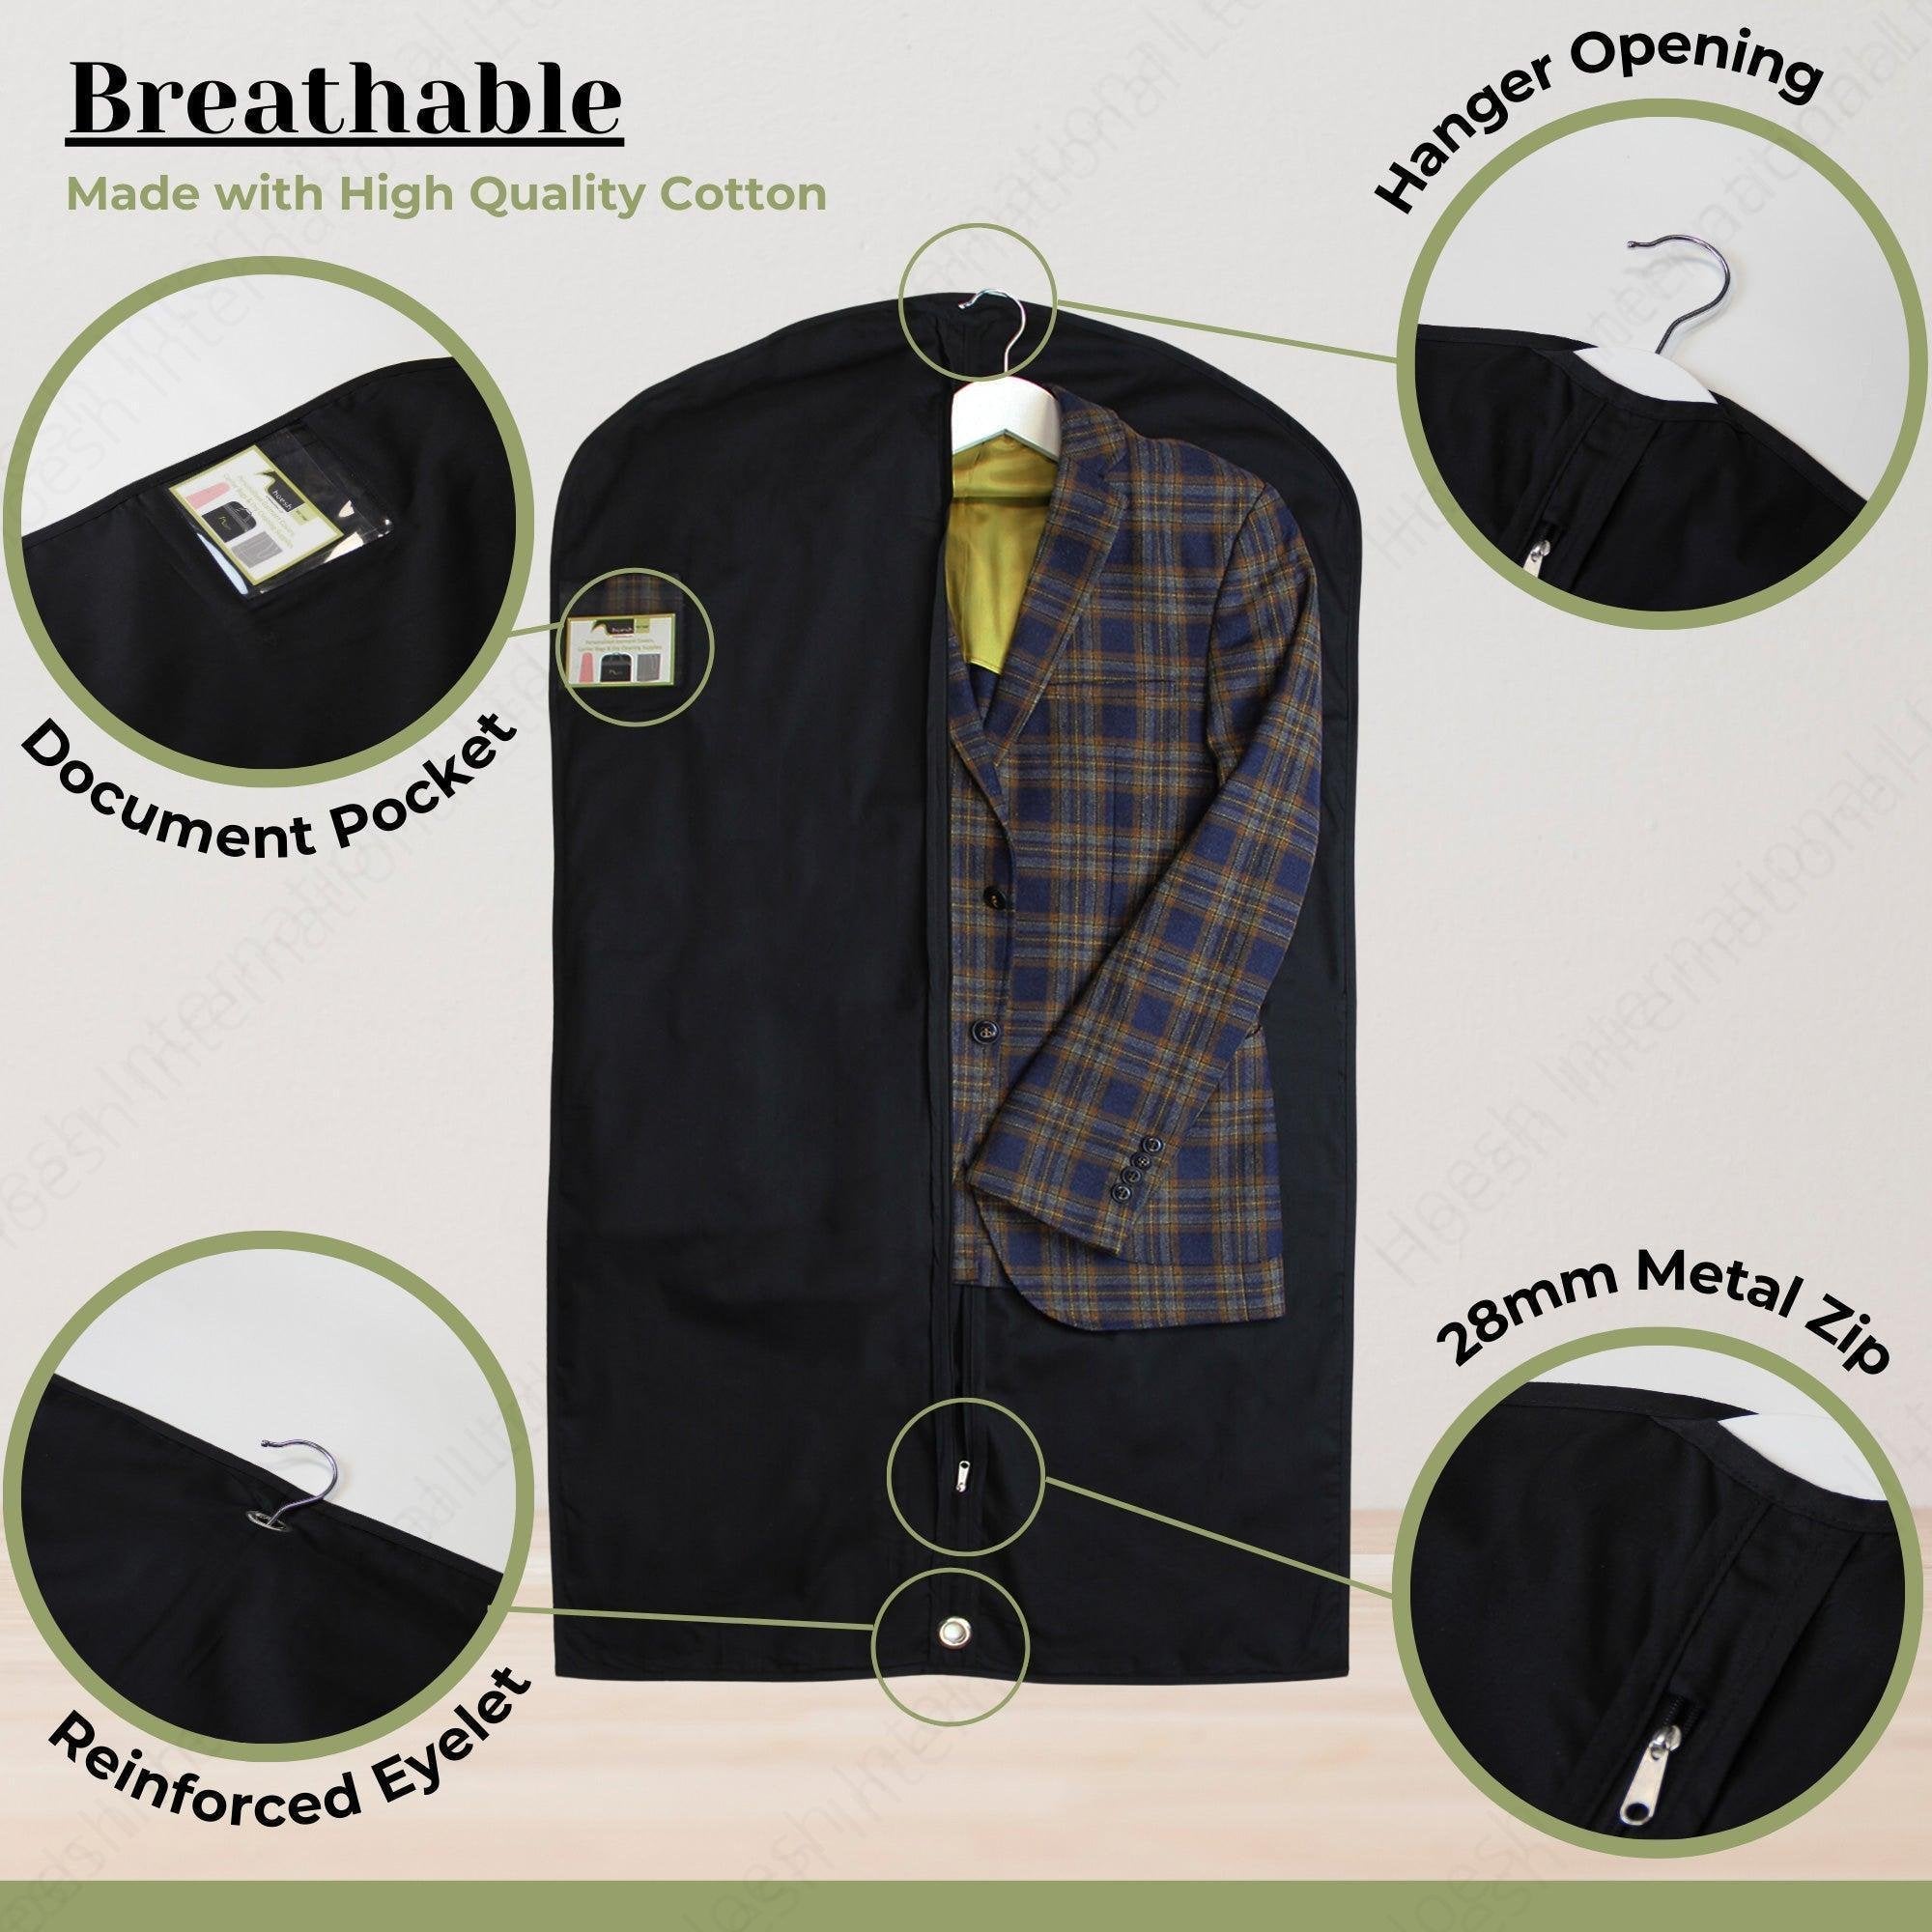 44” Finest Cotton Twill Breathable Fabric Suit Cover - Hoesh International Ltd